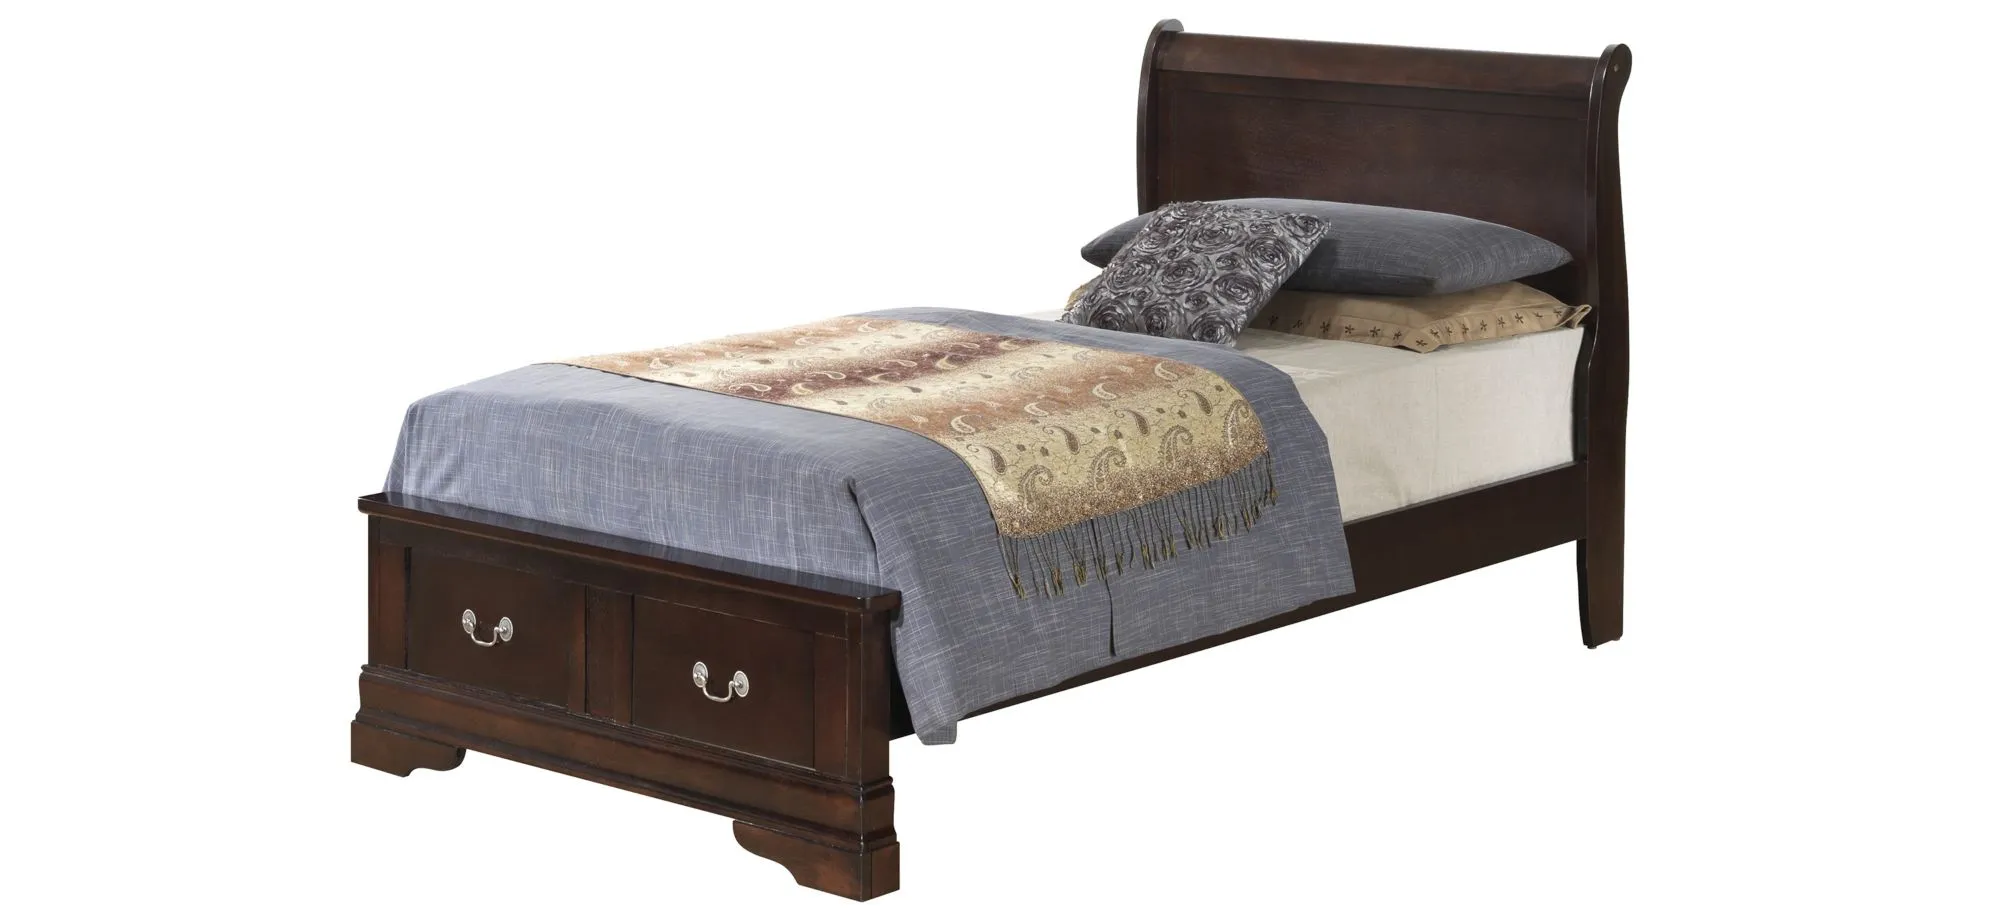 Rossie Storage Bed in Cappuccino by Glory Furniture